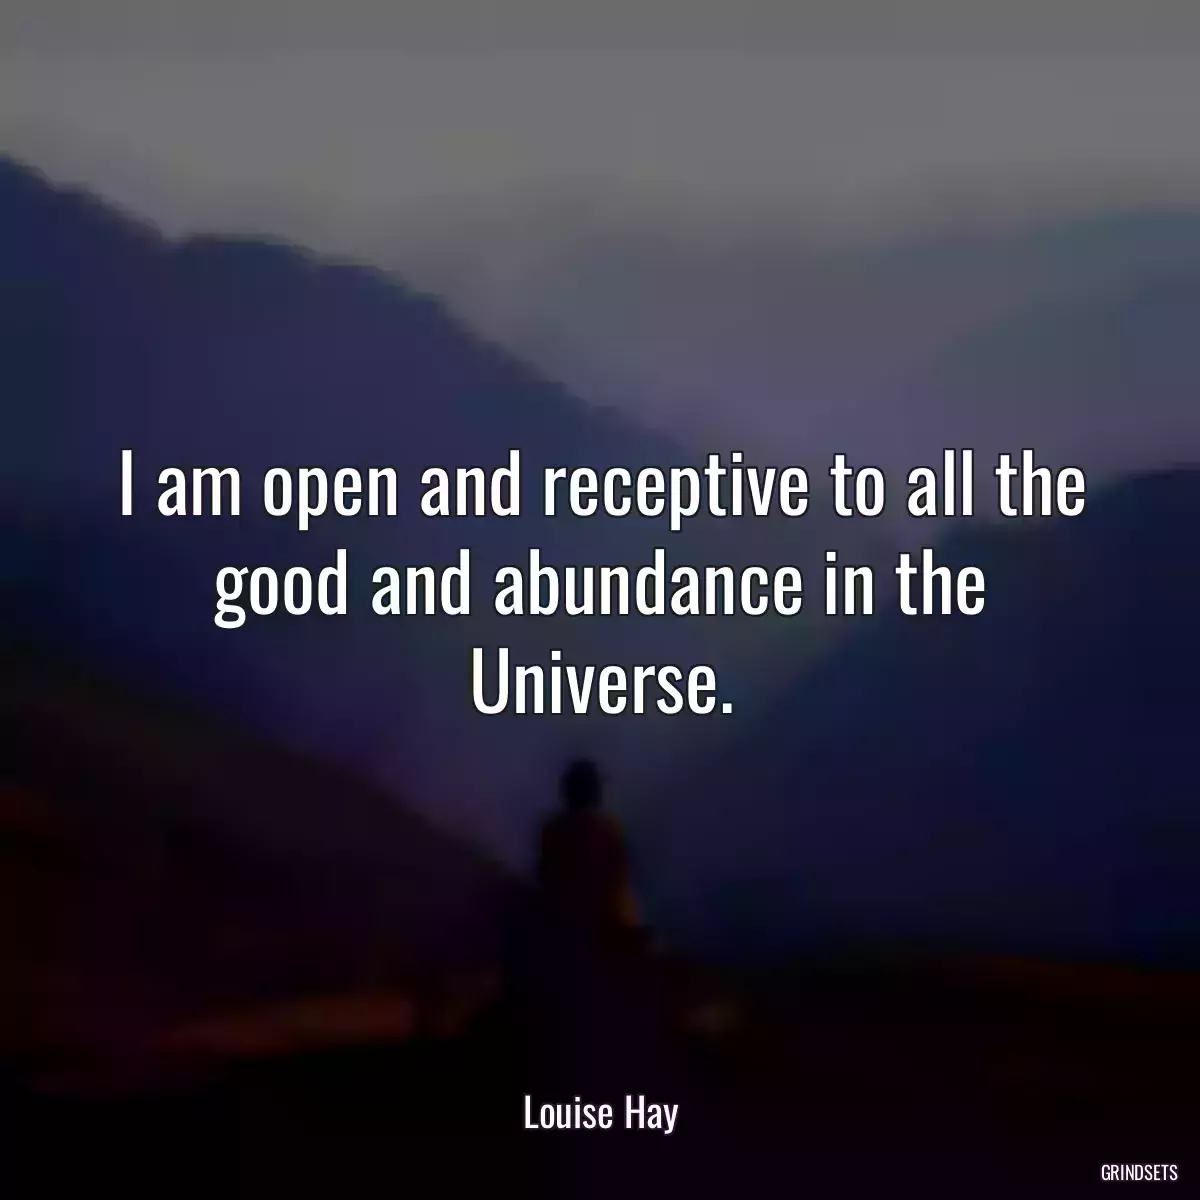 I am open and receptive to all the good and abundance in the Universe.